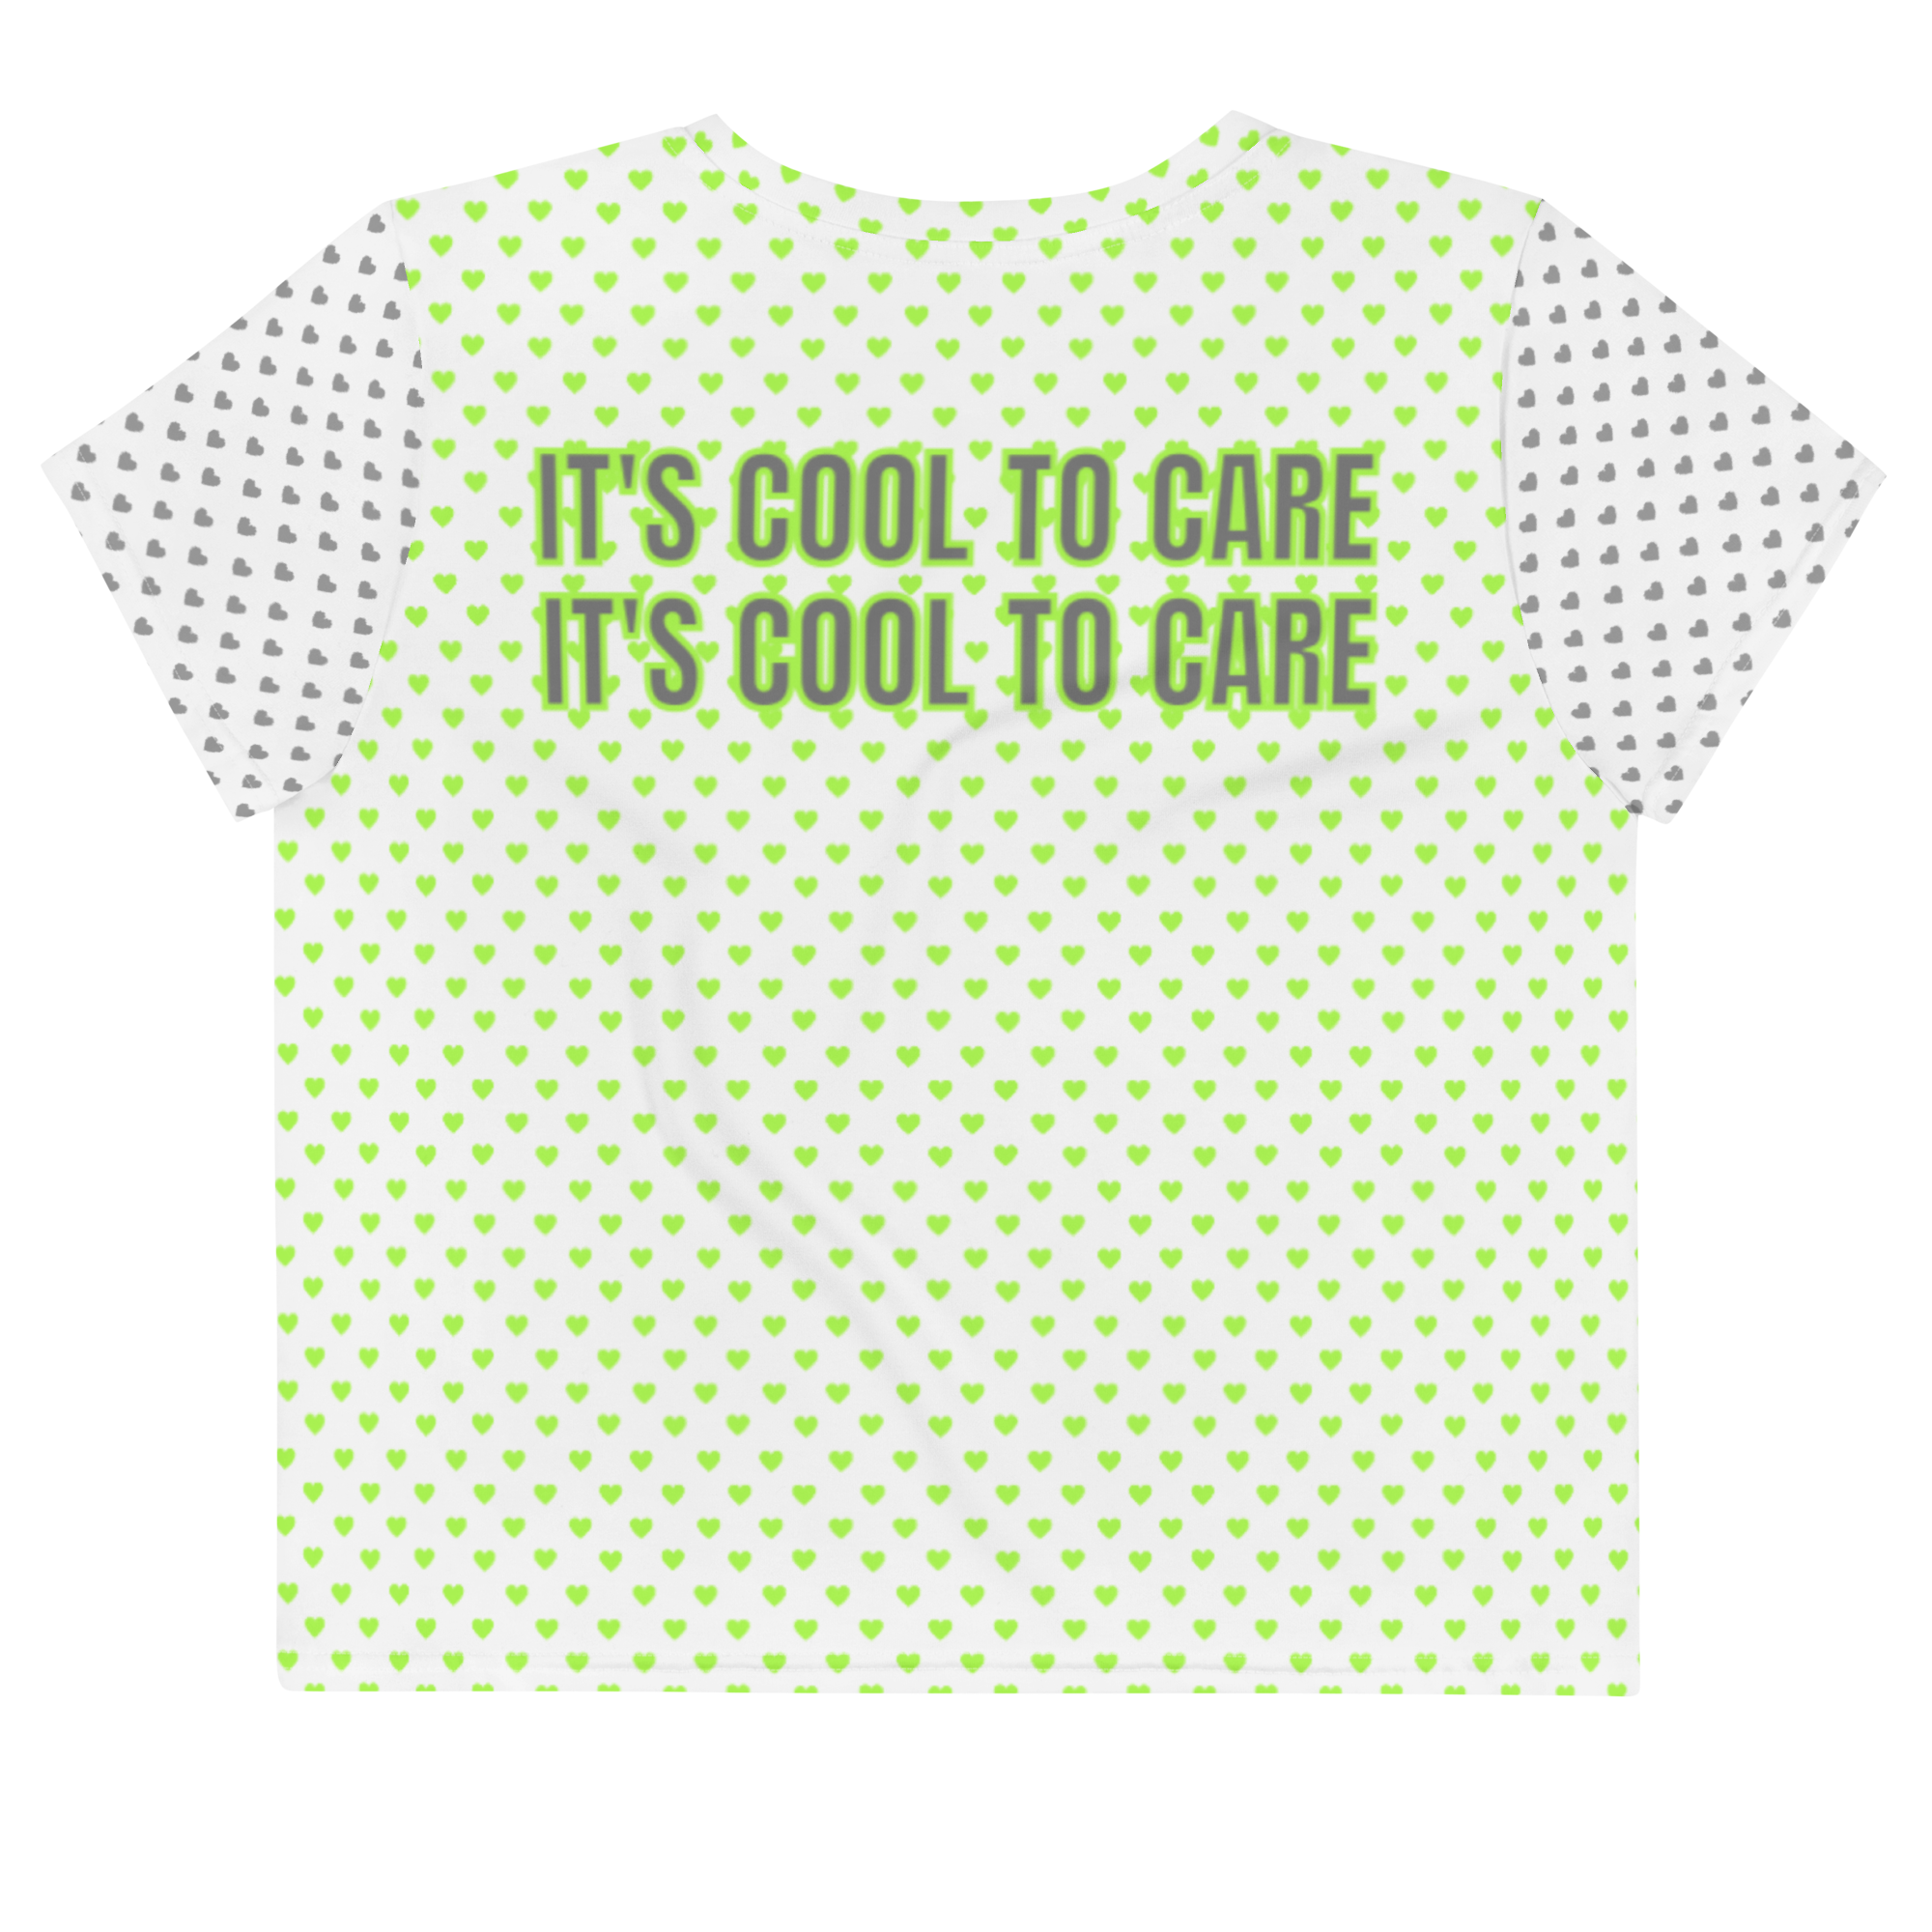 maillot.co | It's Cool To Care Polka Dot Heart Print Cropped Tee - Two-Toned White/Green/Grey | back view